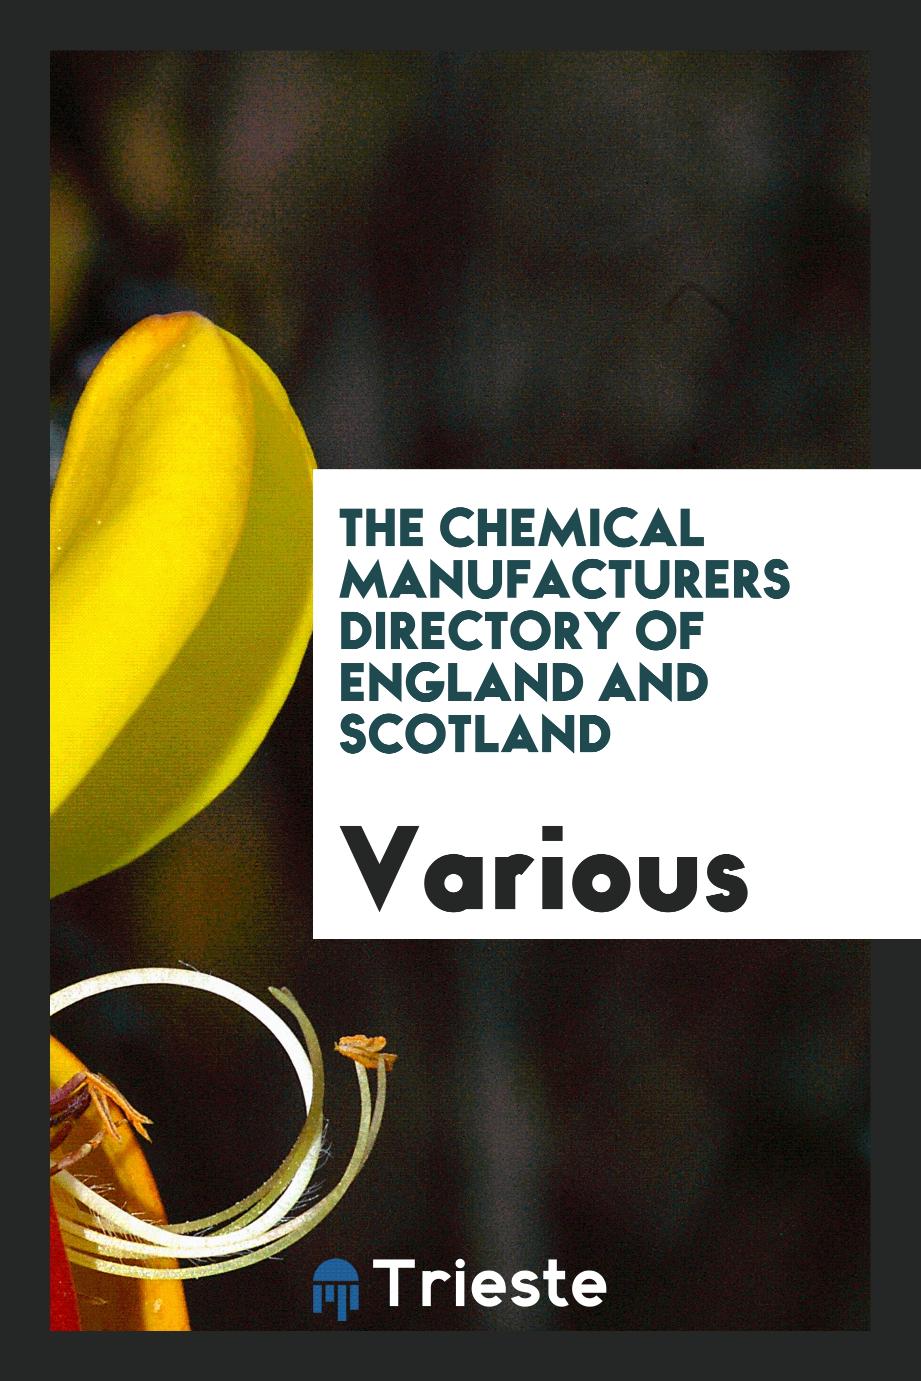 The chemical manufacturers directory of england and scotland